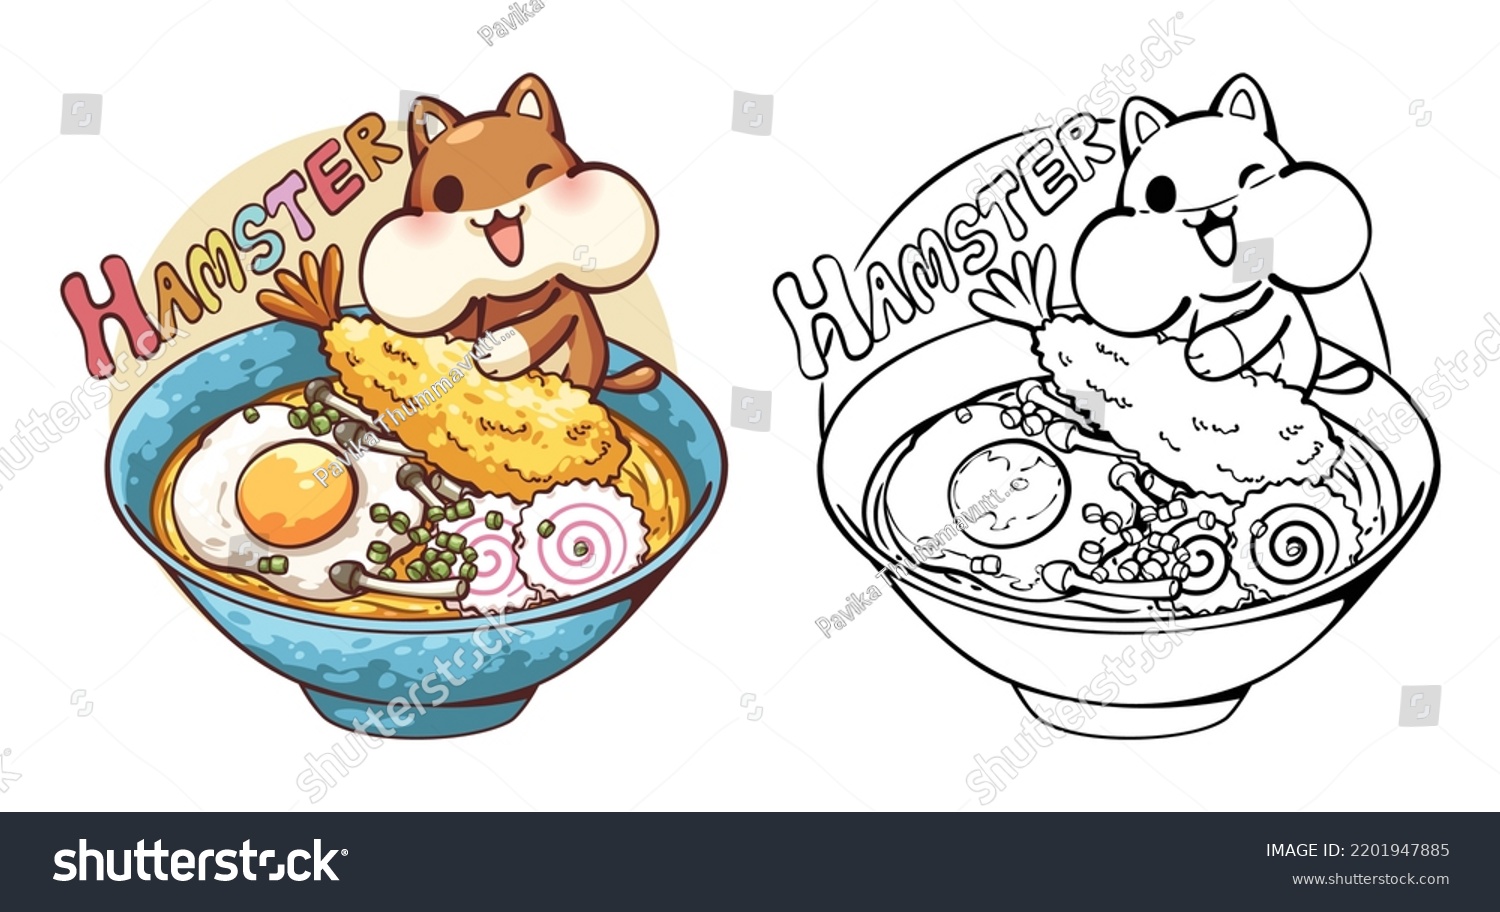 SVG of Cartoon illustration of Puffy cheeks hamster with ramen, Puffy cheeked hamster riding a large shrimp tempura, You can use these clipart for any custom project or used for as part of your design. svg